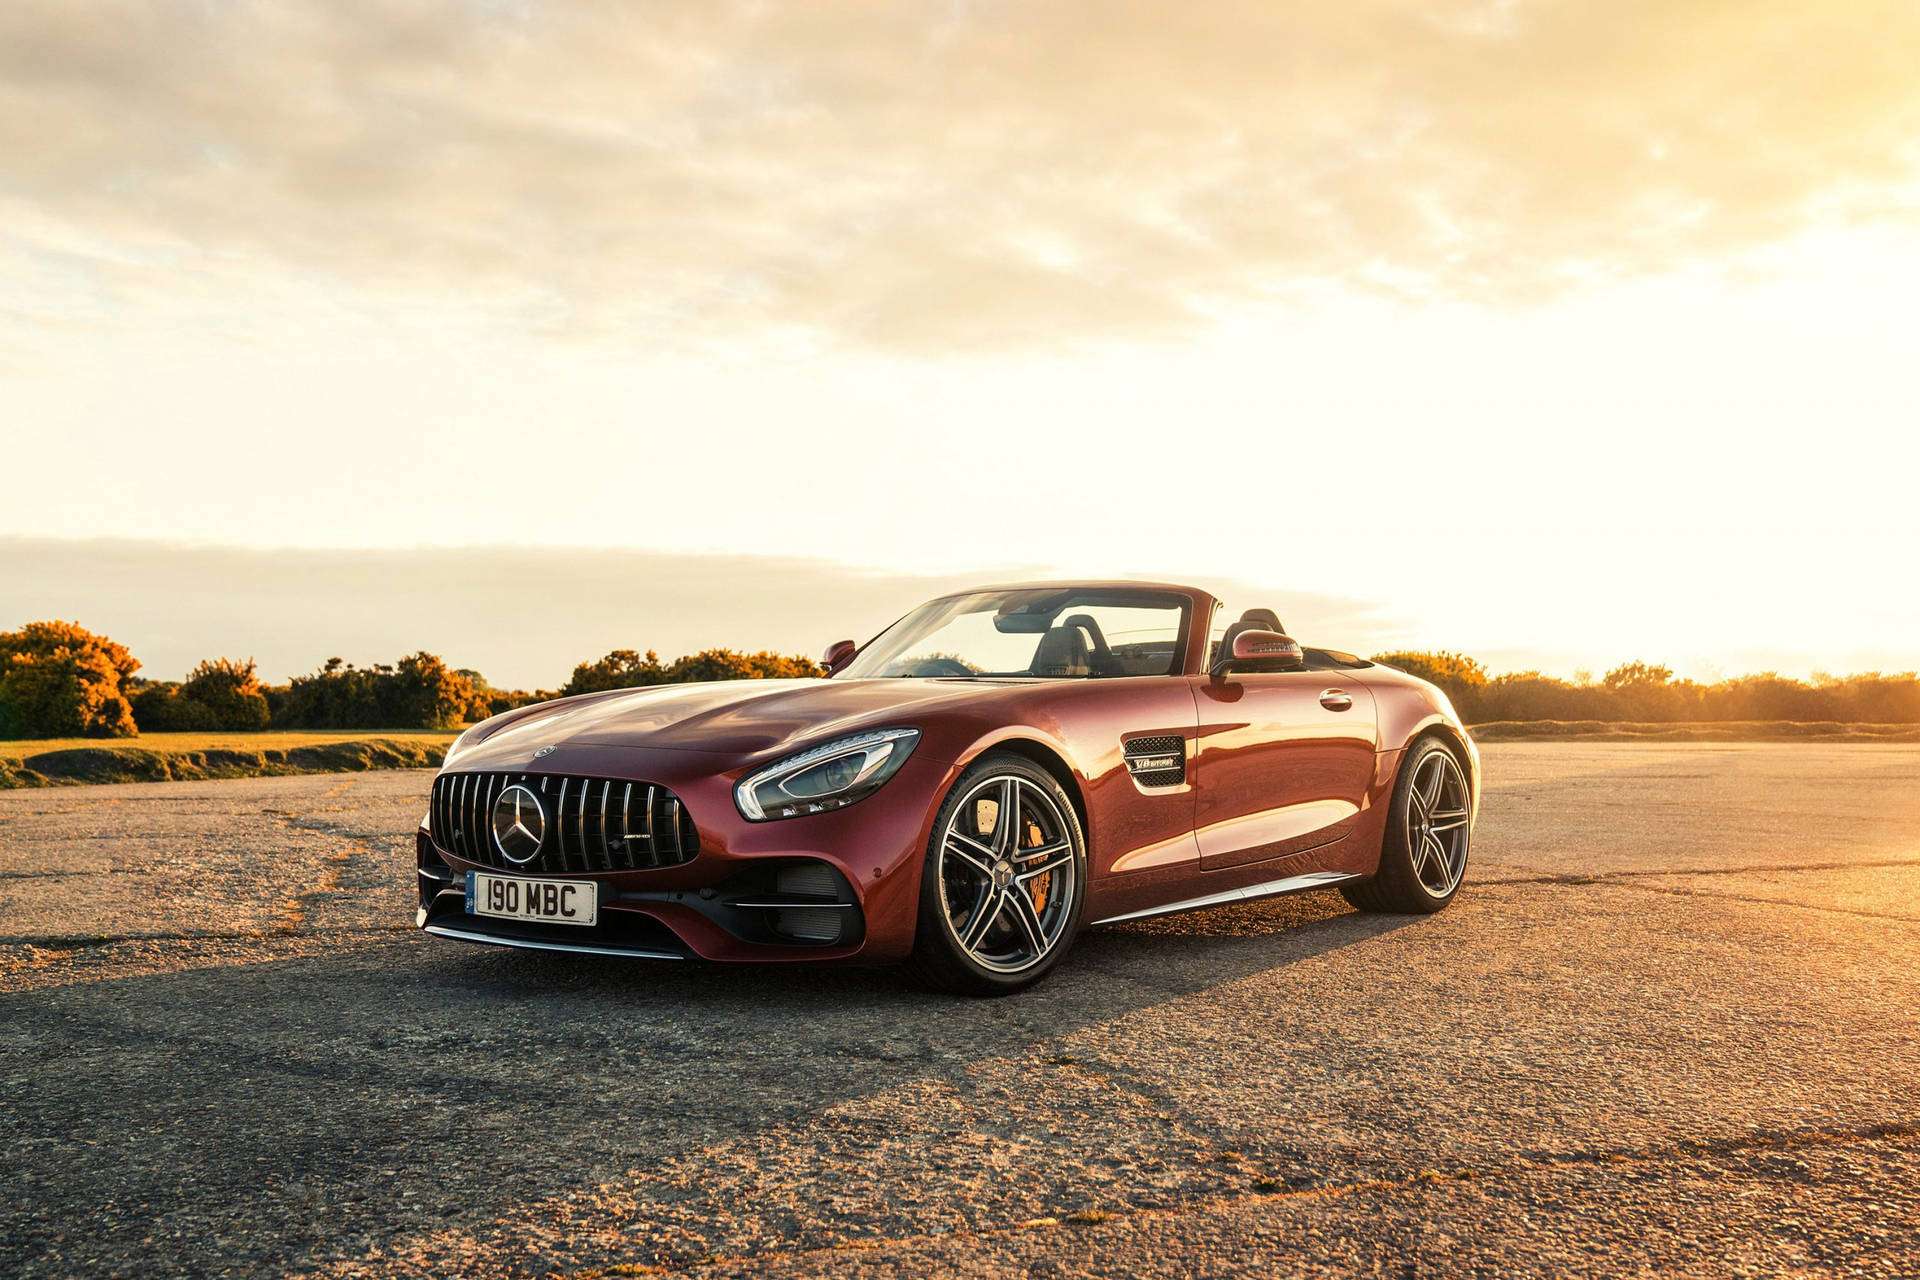 Mercedes Amg Gt Roadster - A Red Sports Car Wallpaper